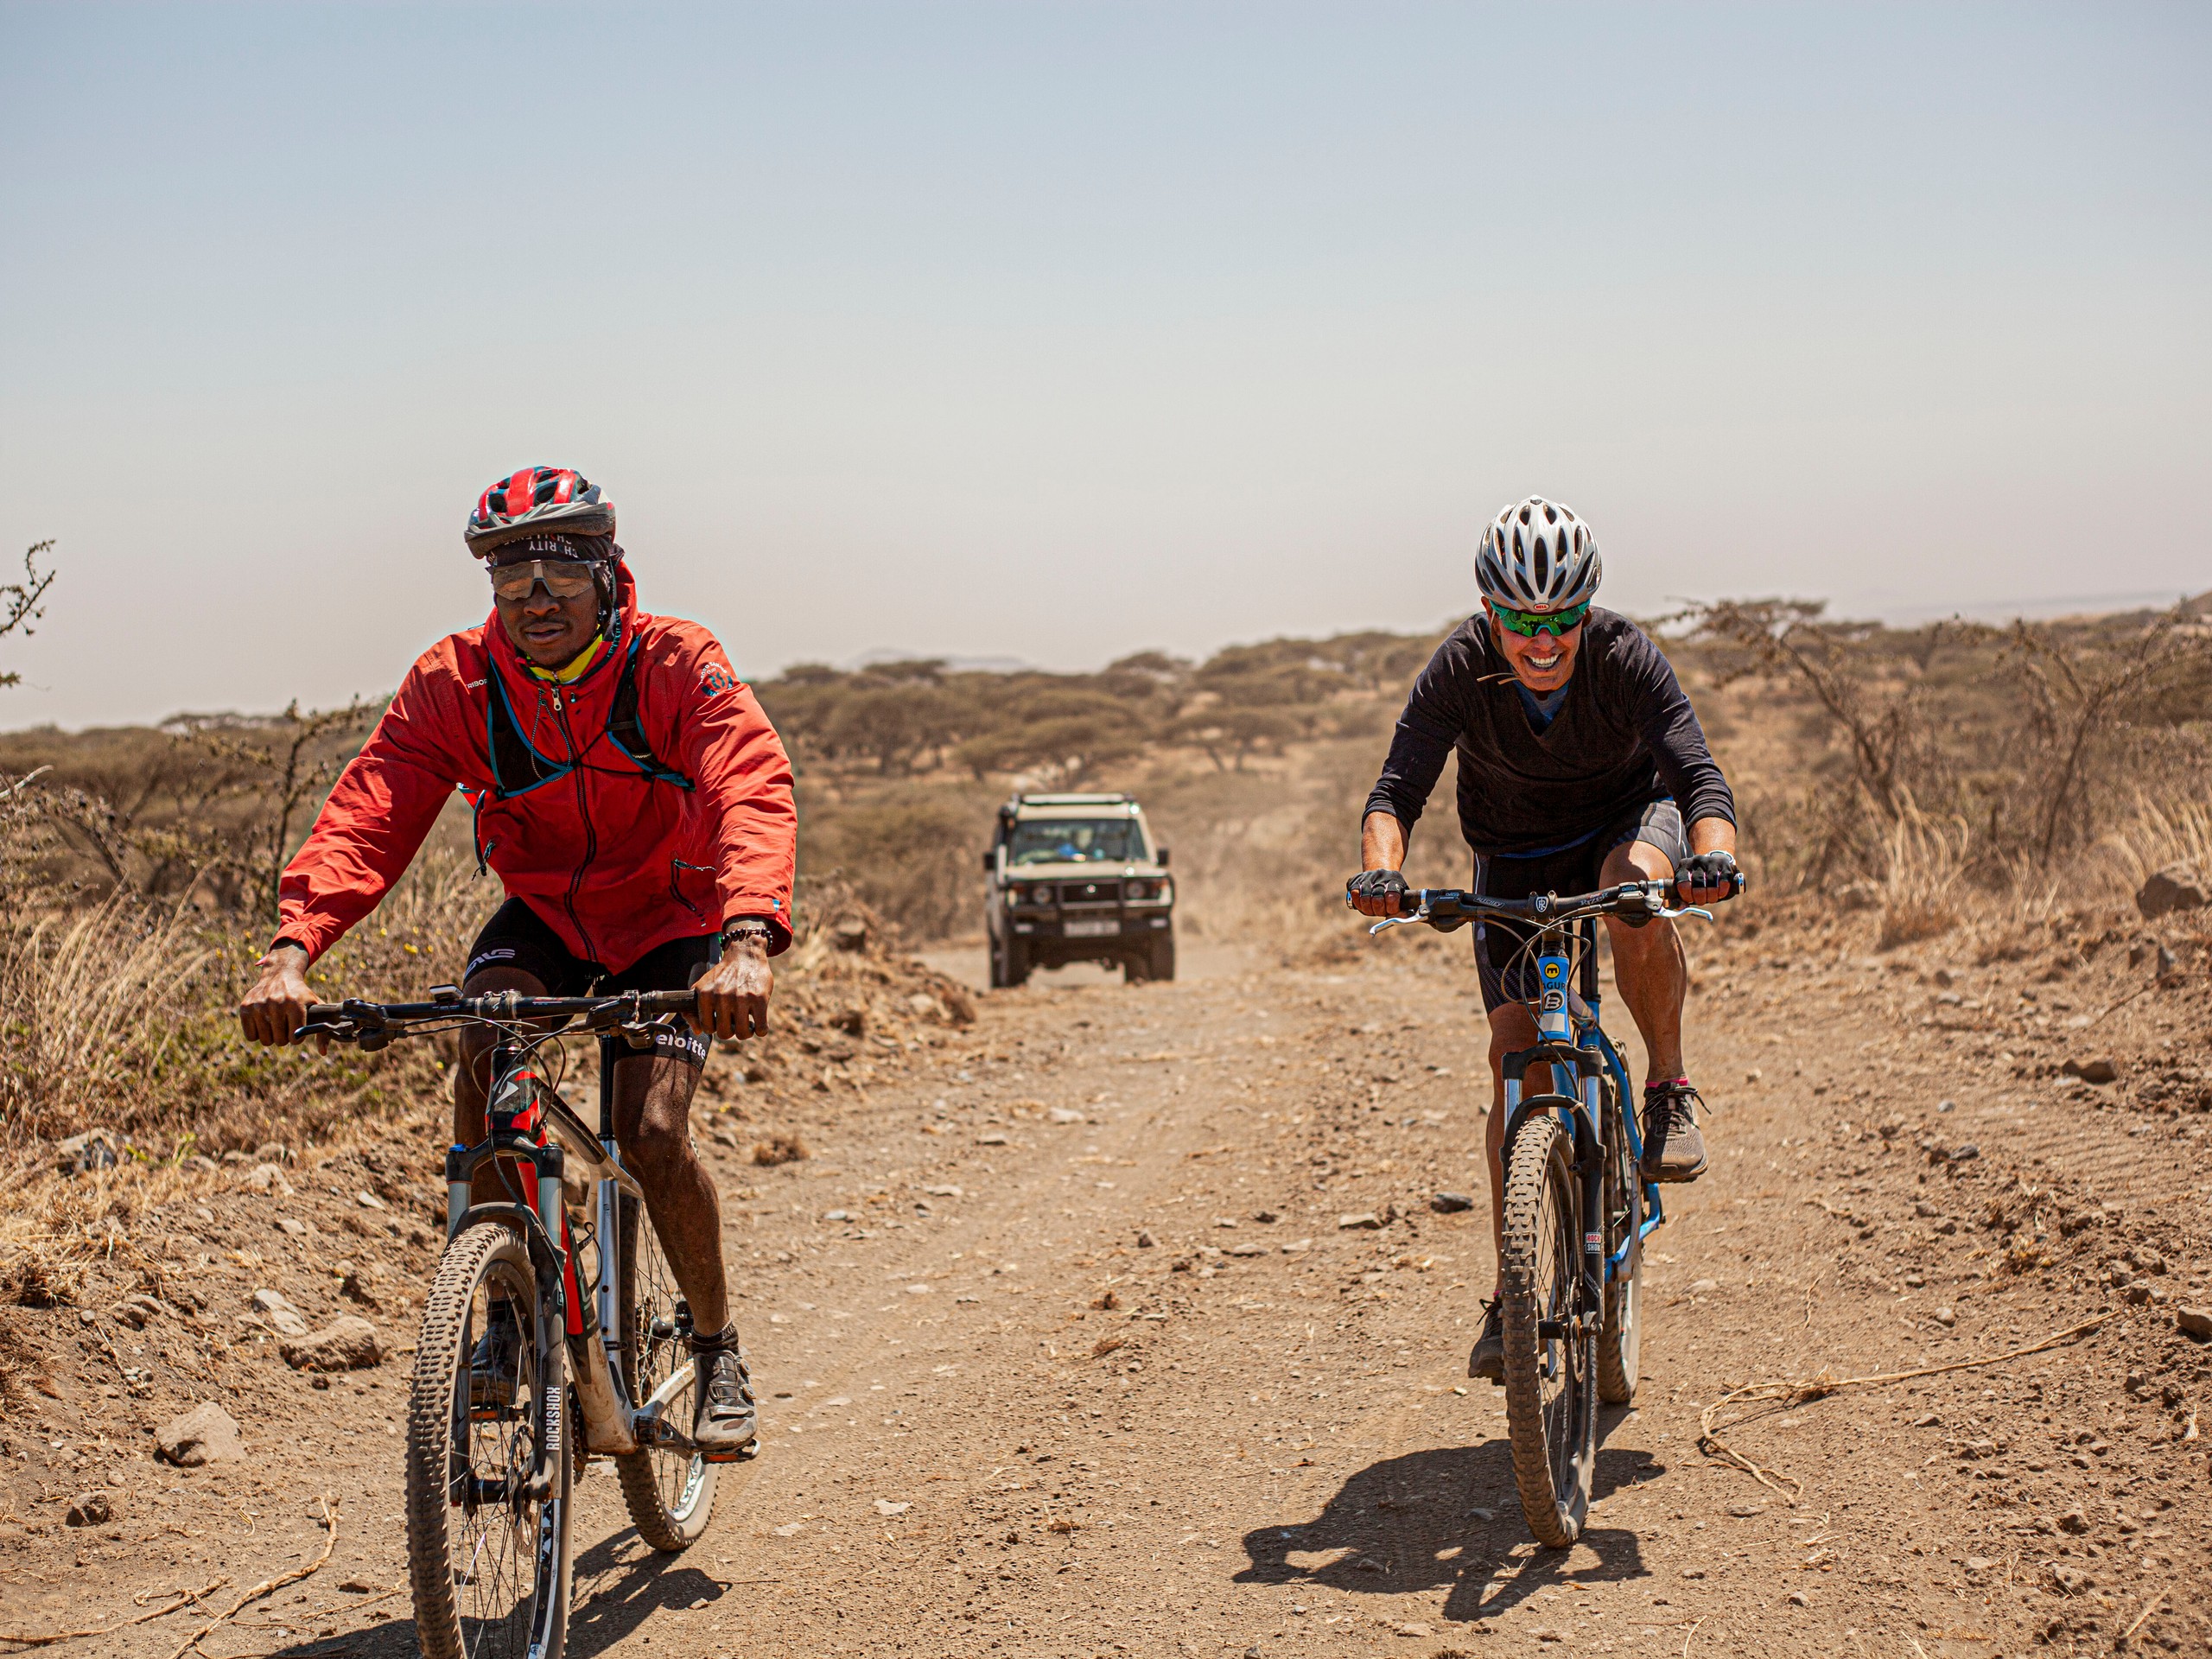 Mountain Biking from Kilimanjaro towards Indian Ocean with a guided group 05